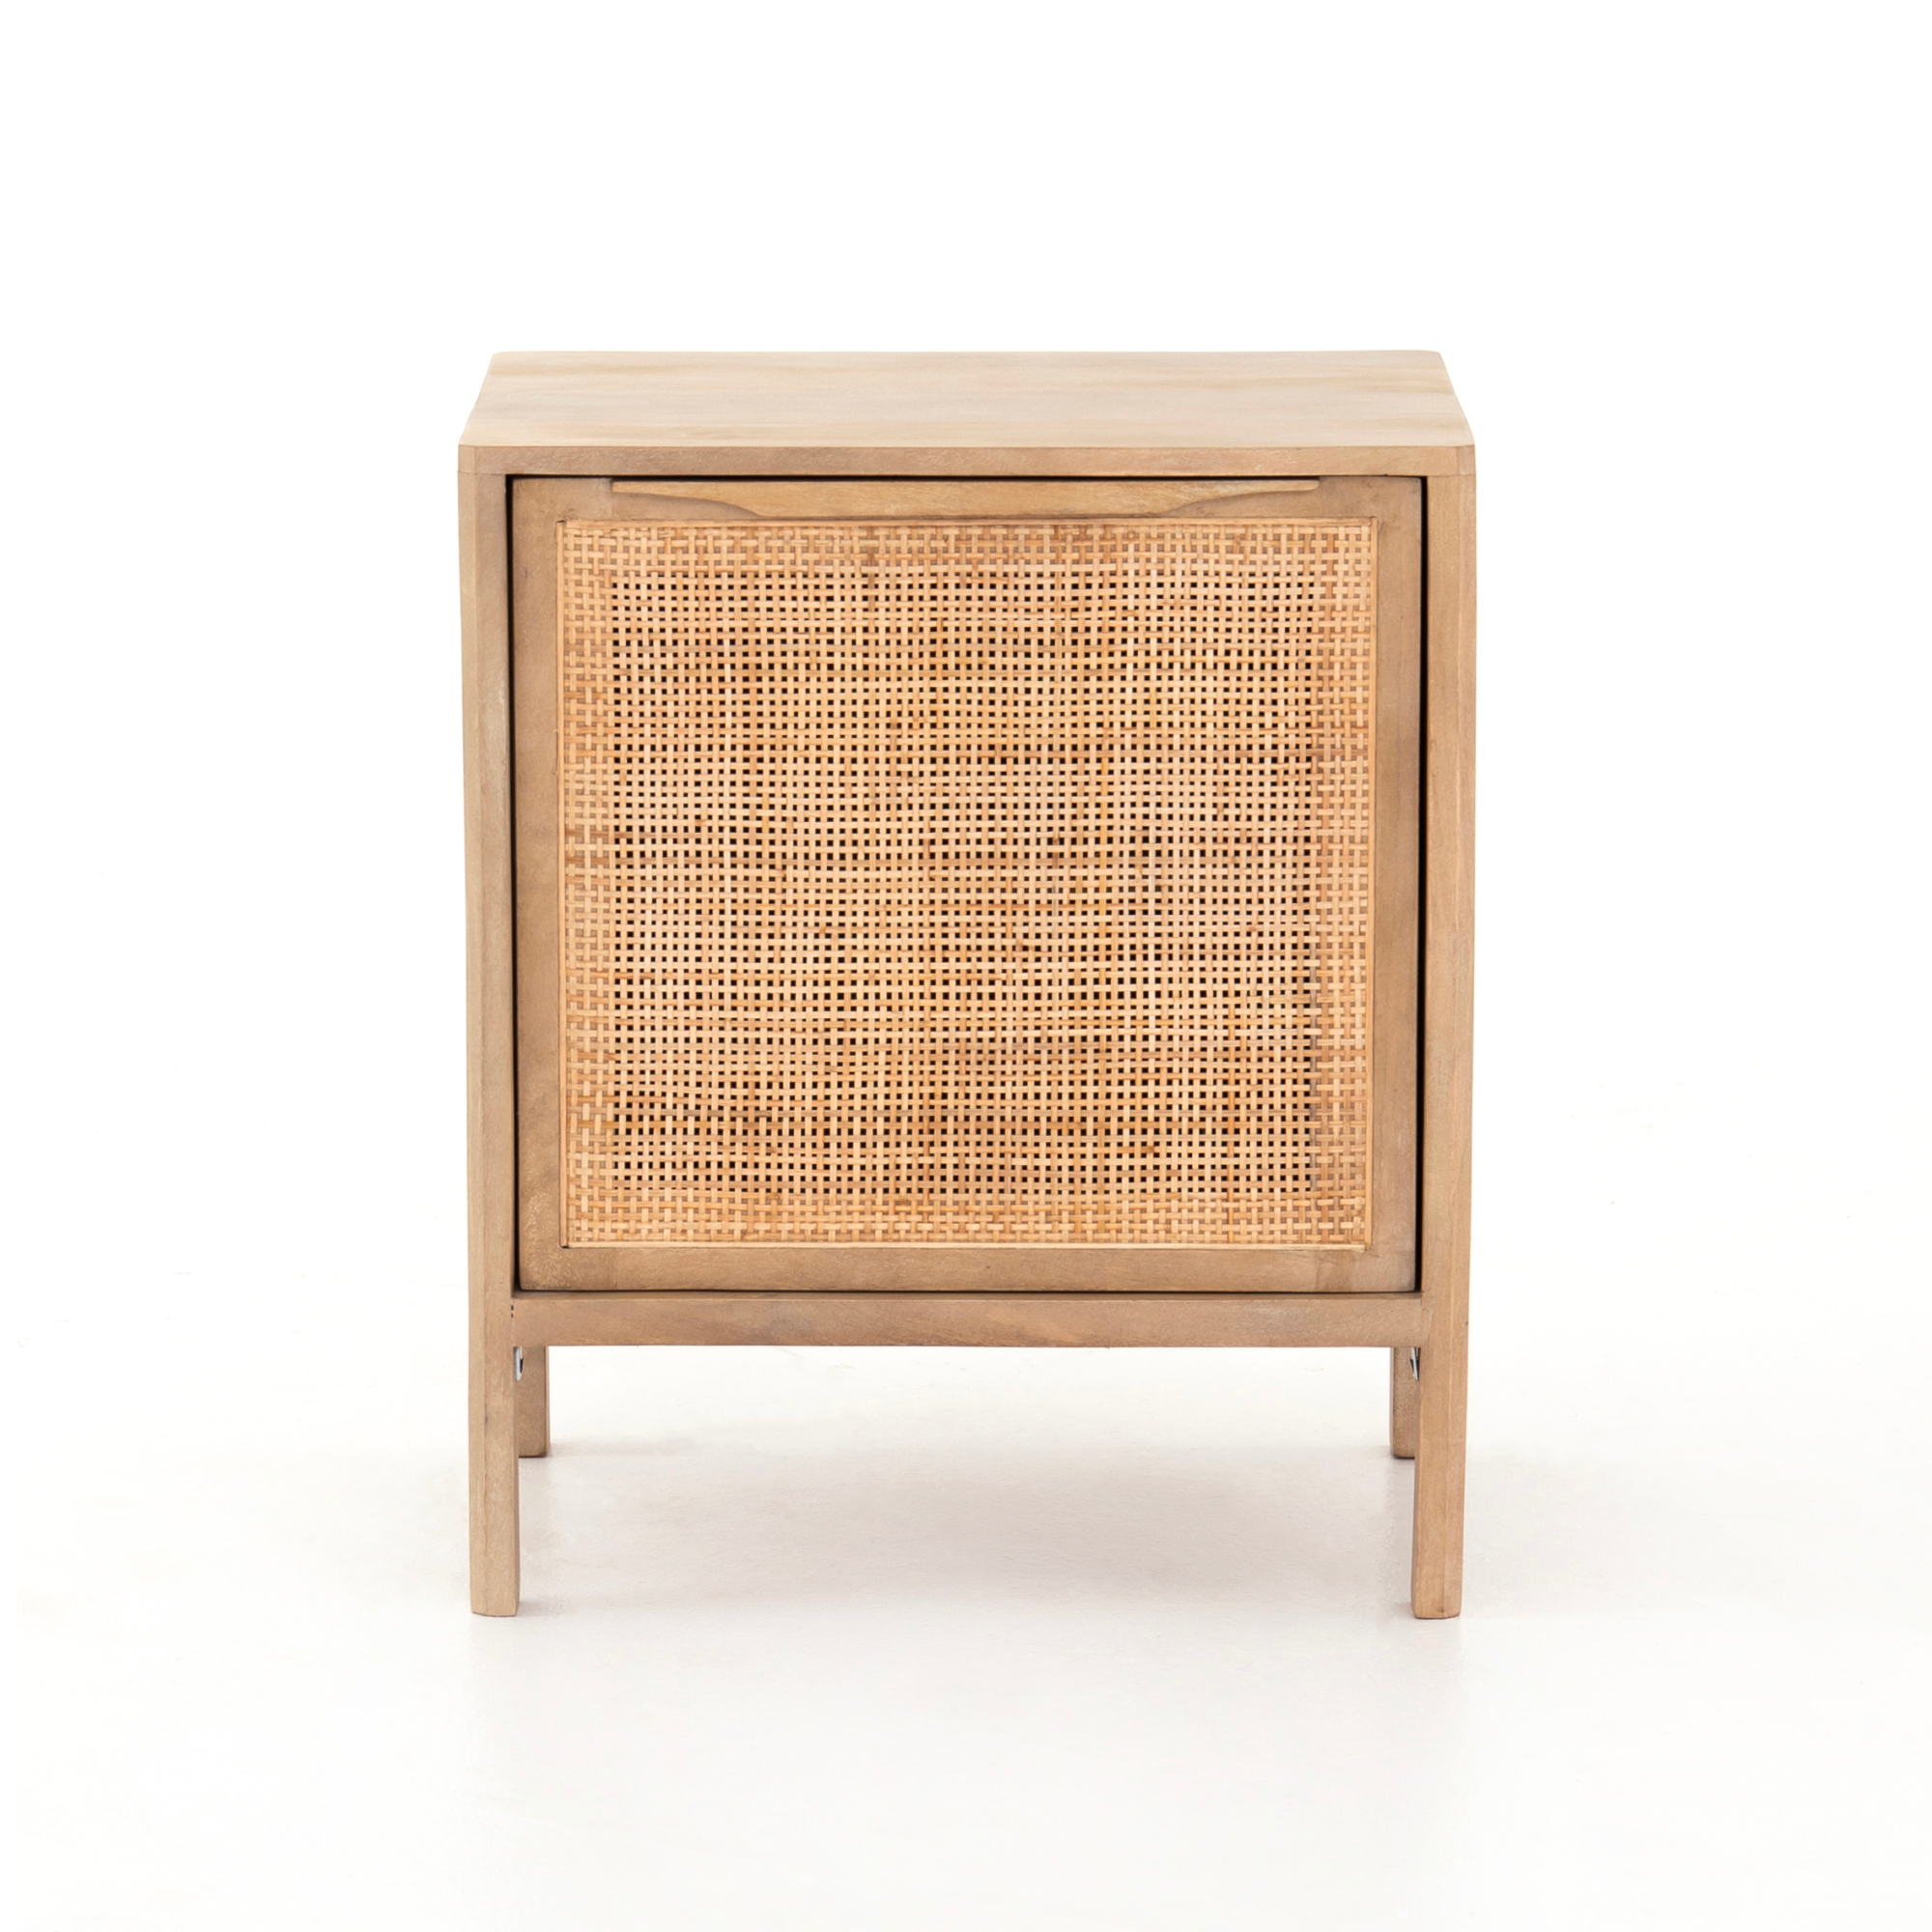 Sybil Nightstand - Natural